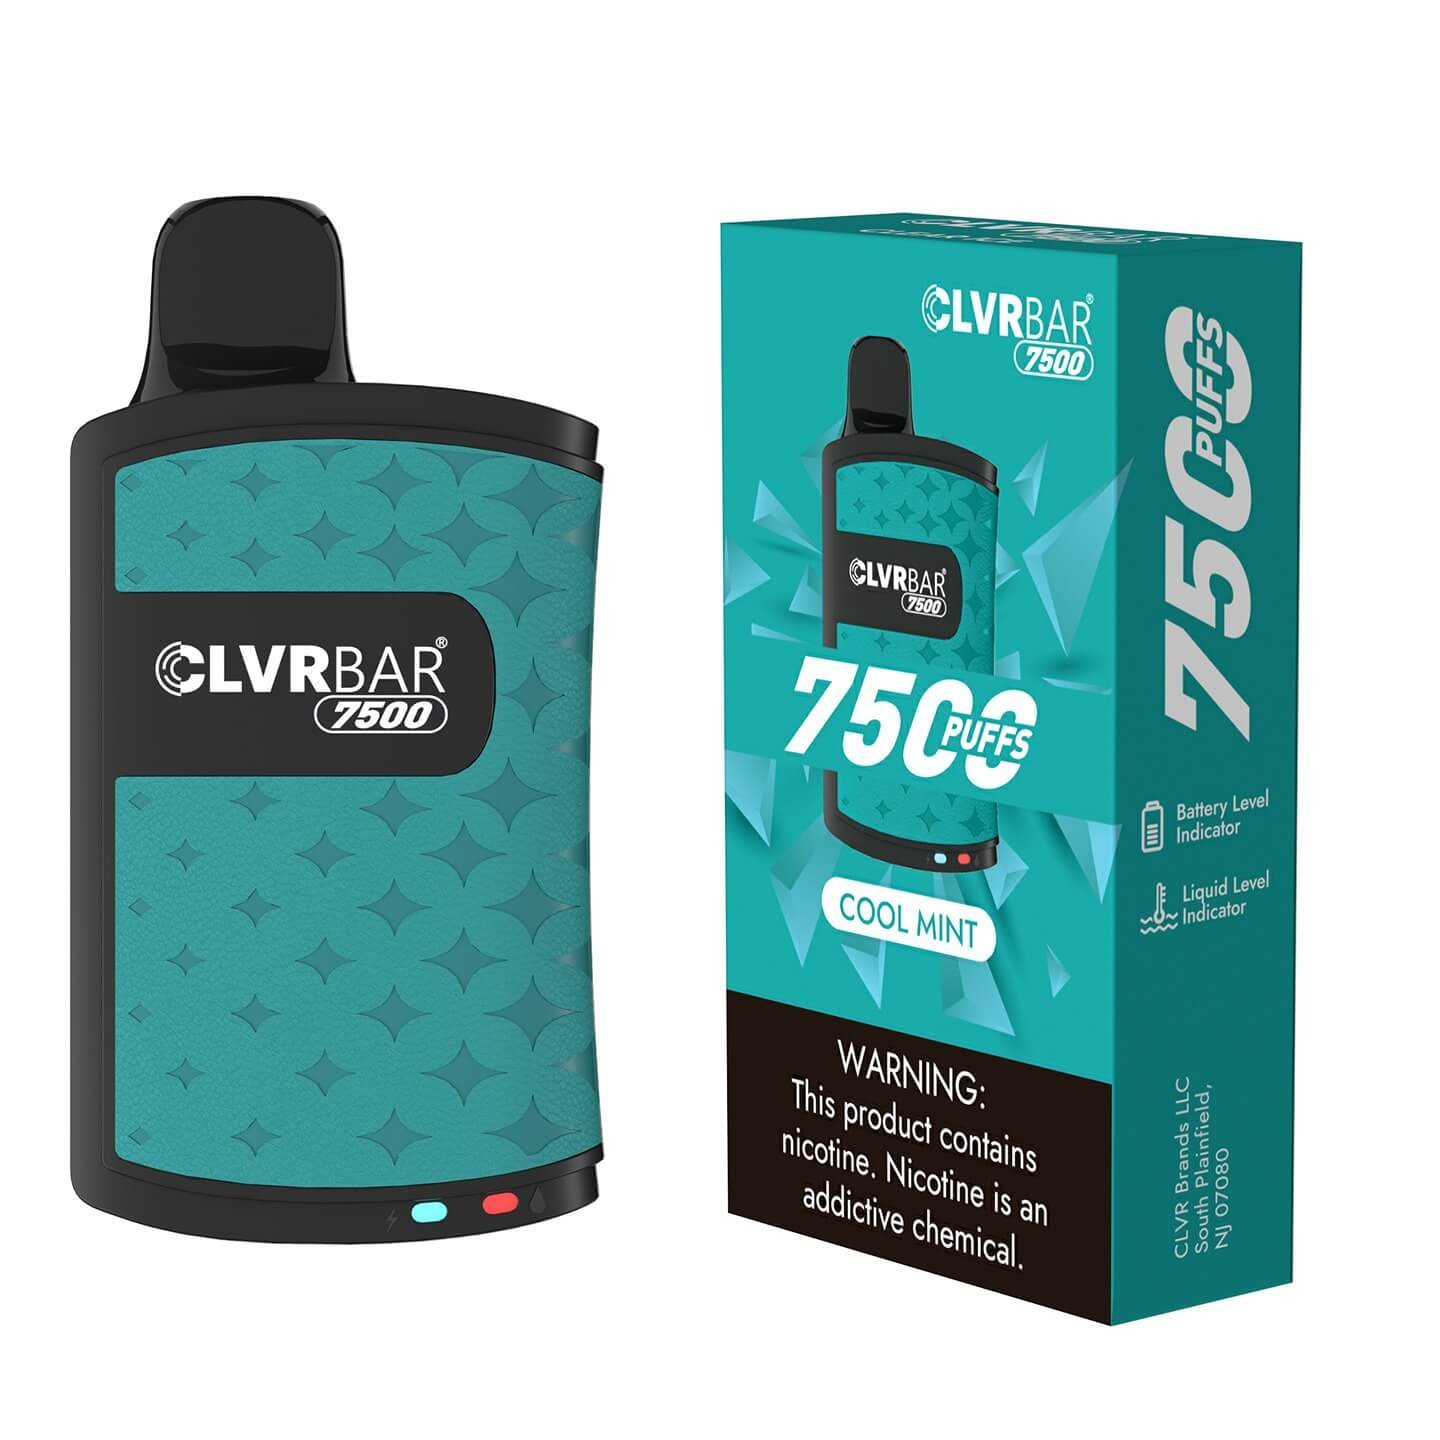 CLVRBAR Disposable Device (Cool Mint - 7500 Puffs)